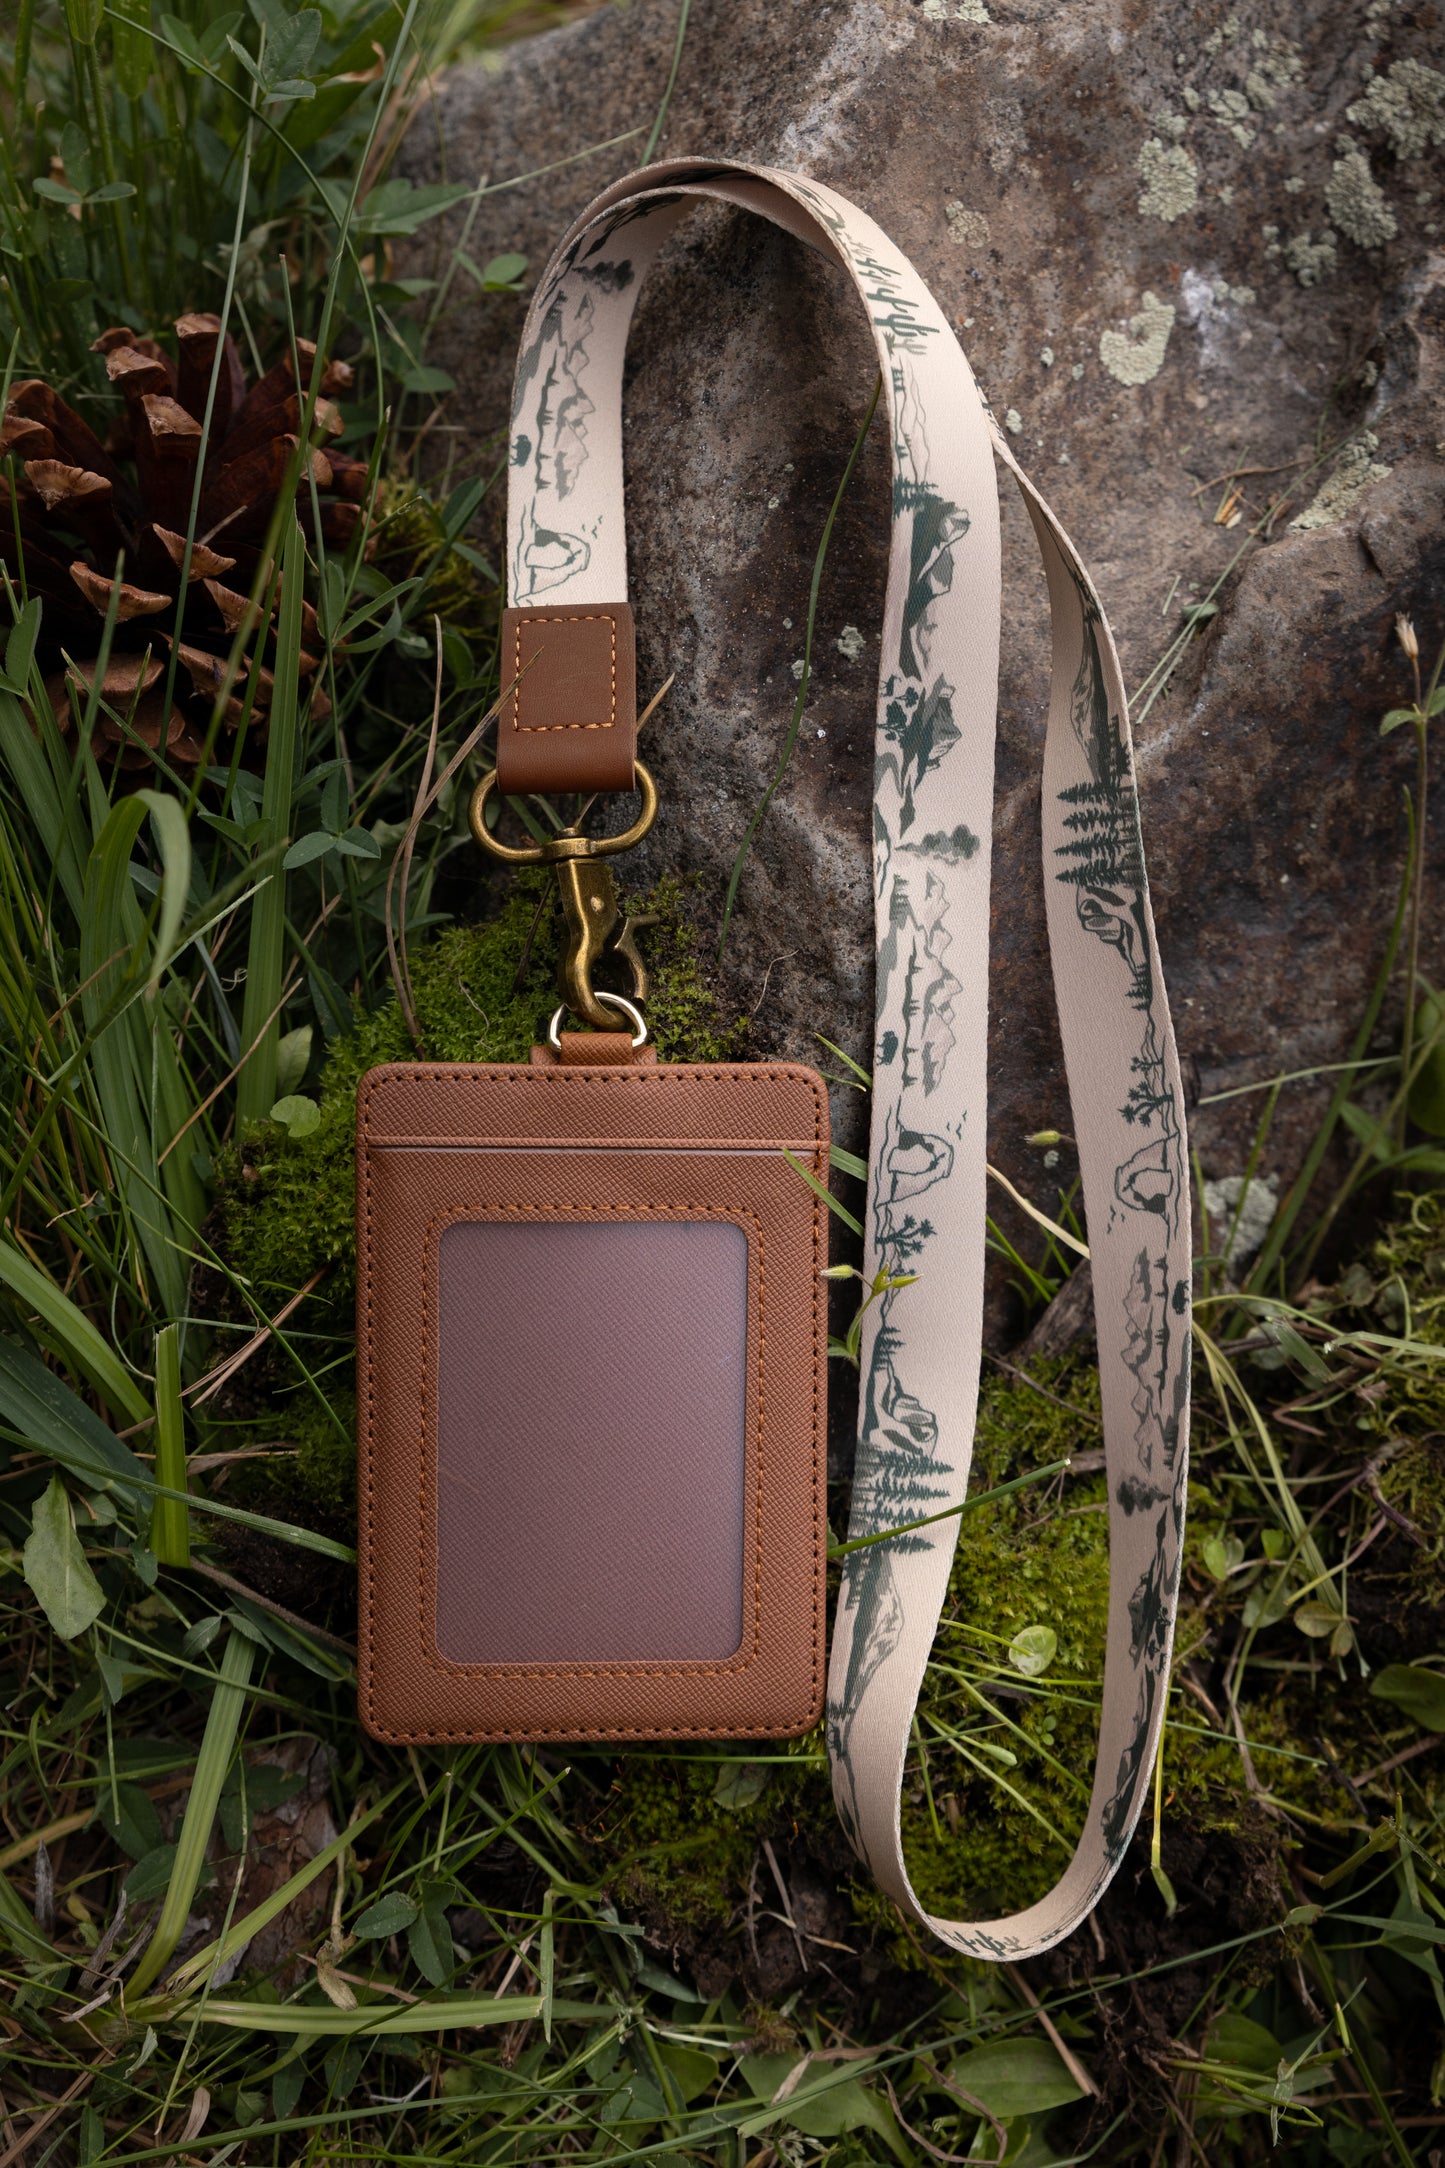 National park printed neck lanyard connected to id holder laying on forest floor